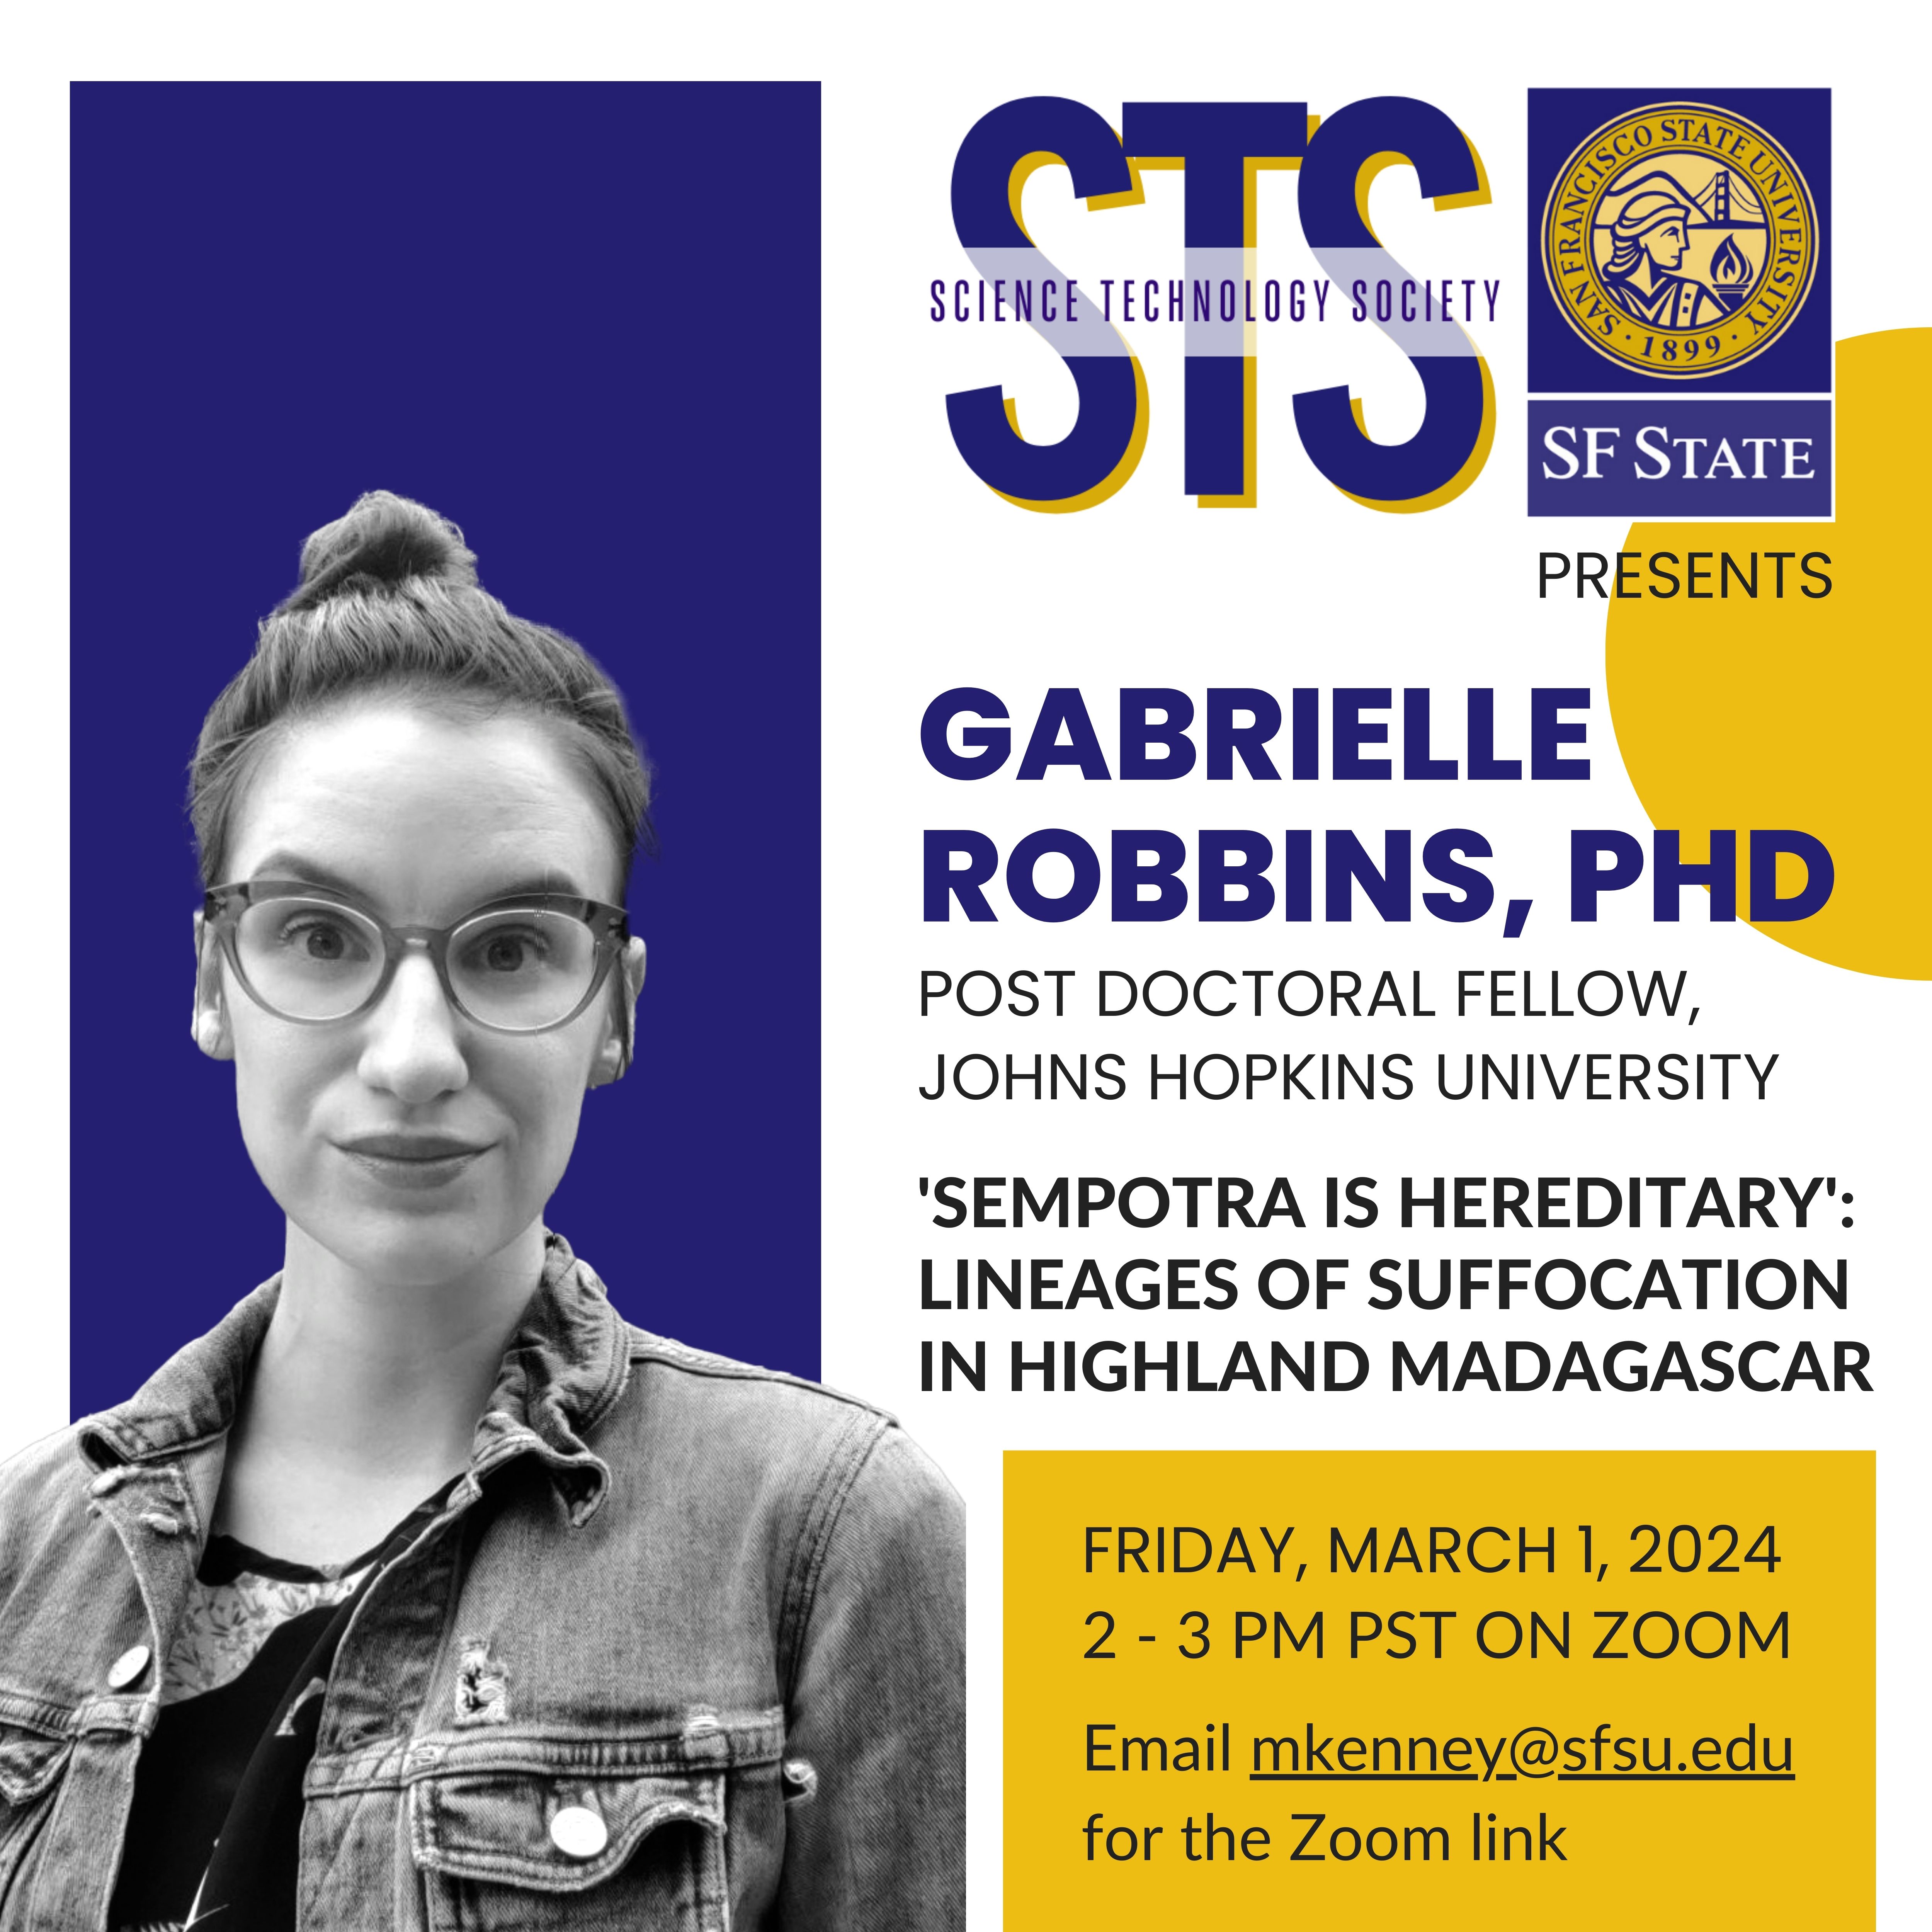 A flyer advertising a talk with Gabrielle Robbins